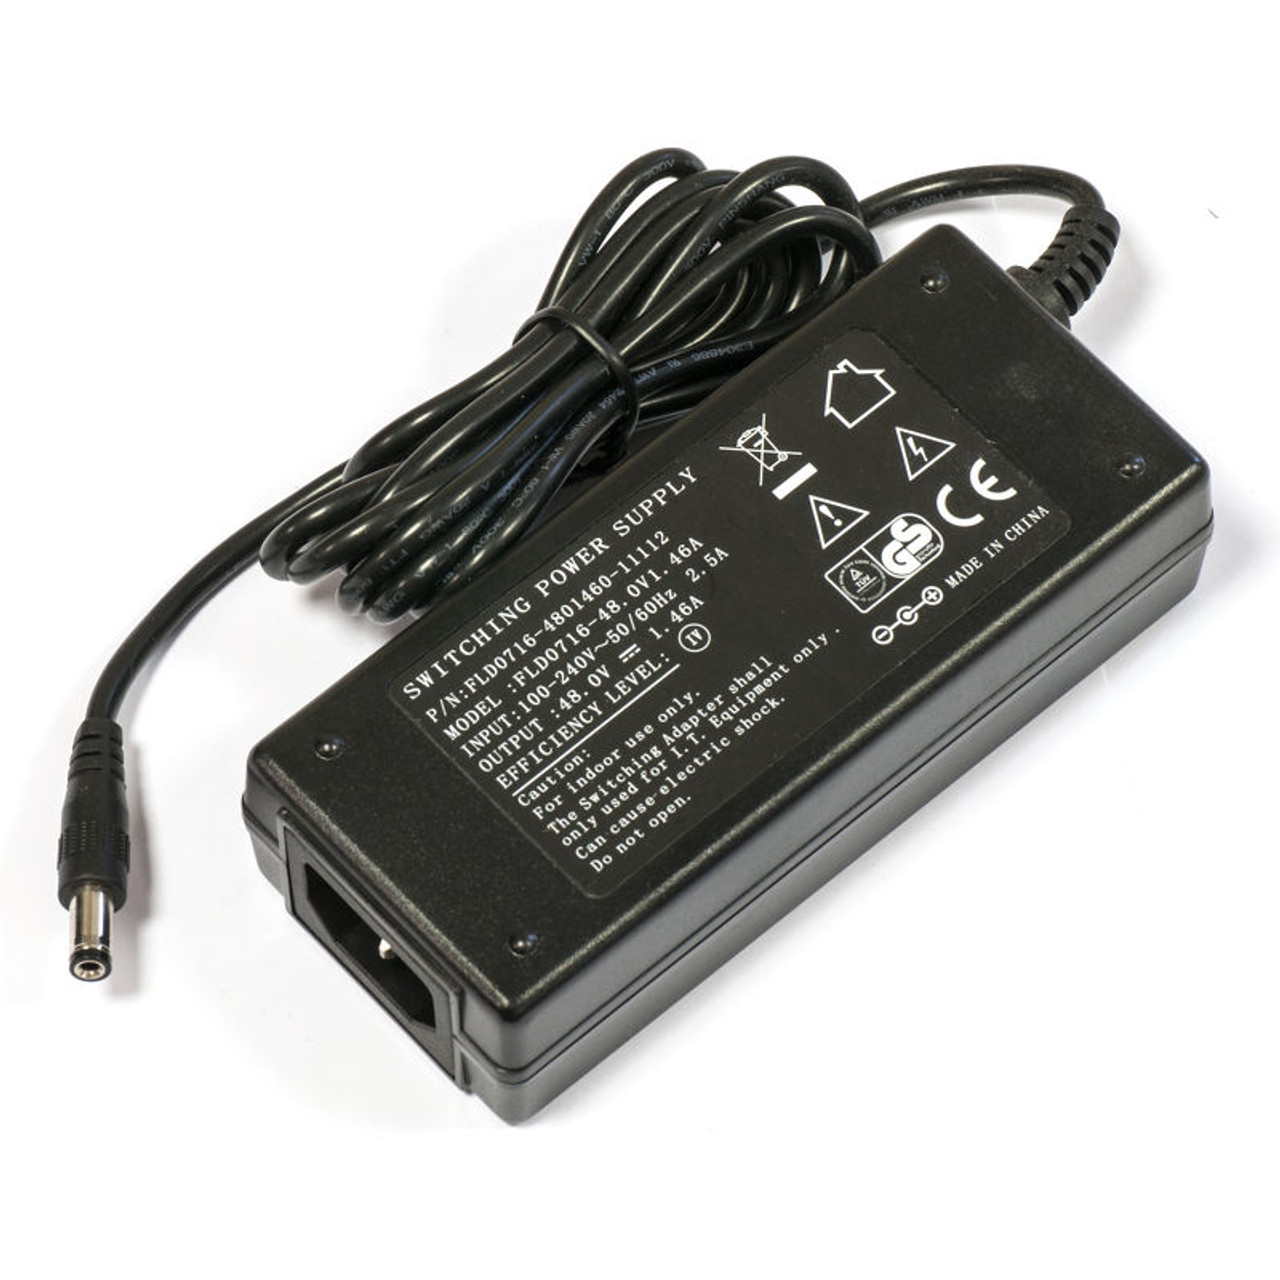 Power Adapter 48V 2A Switching Power Supply AC to DC 220V To 48